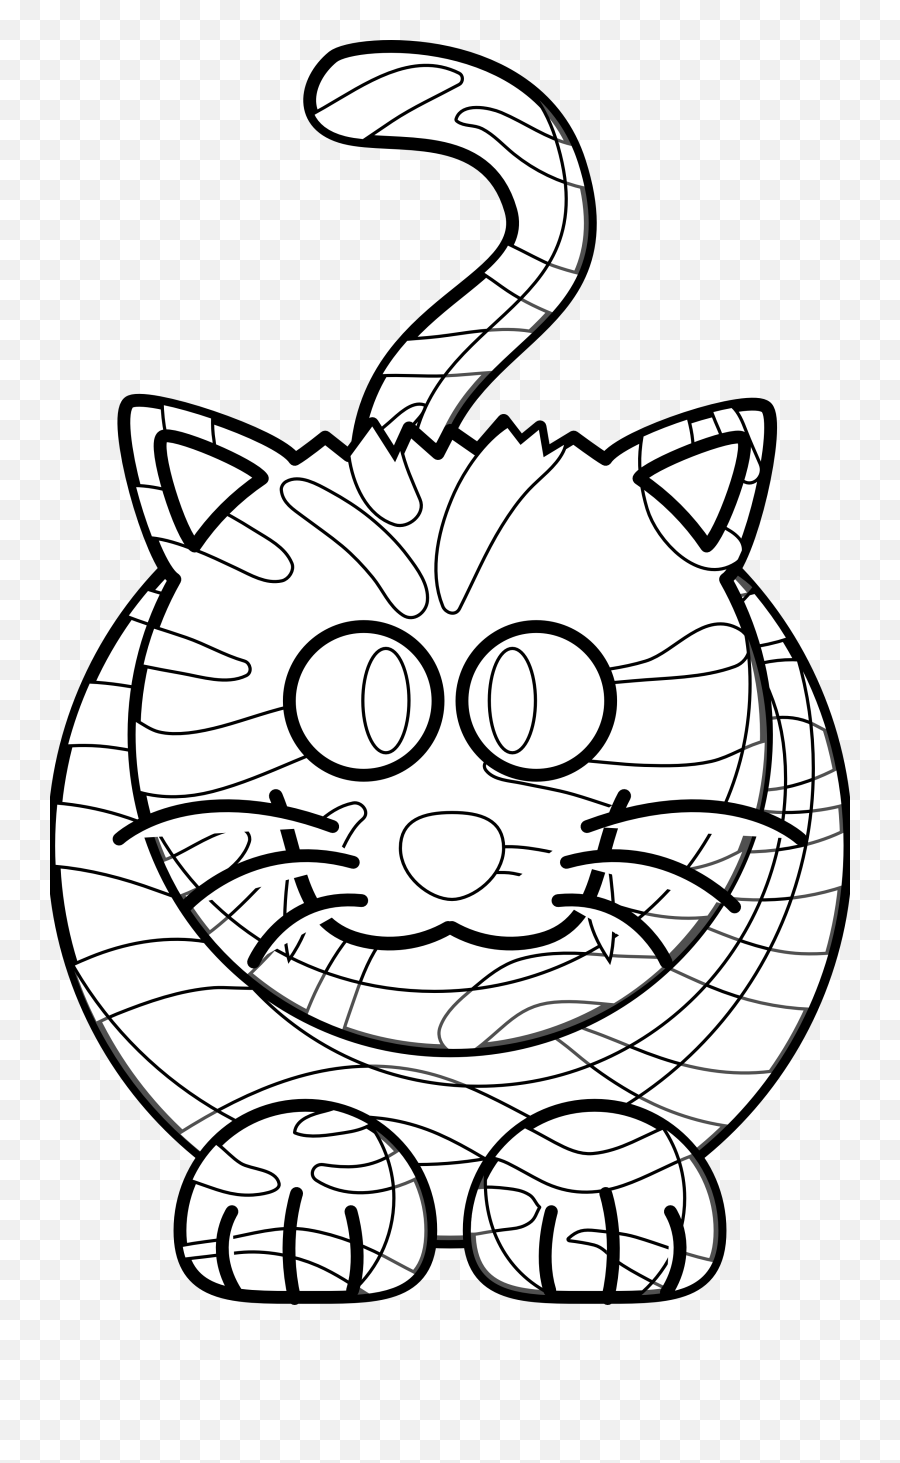 Tiger Black And White Tiger Clipart Black And White Clipart - Black And White Tiger Clipart Emoji,Tiger Clipart